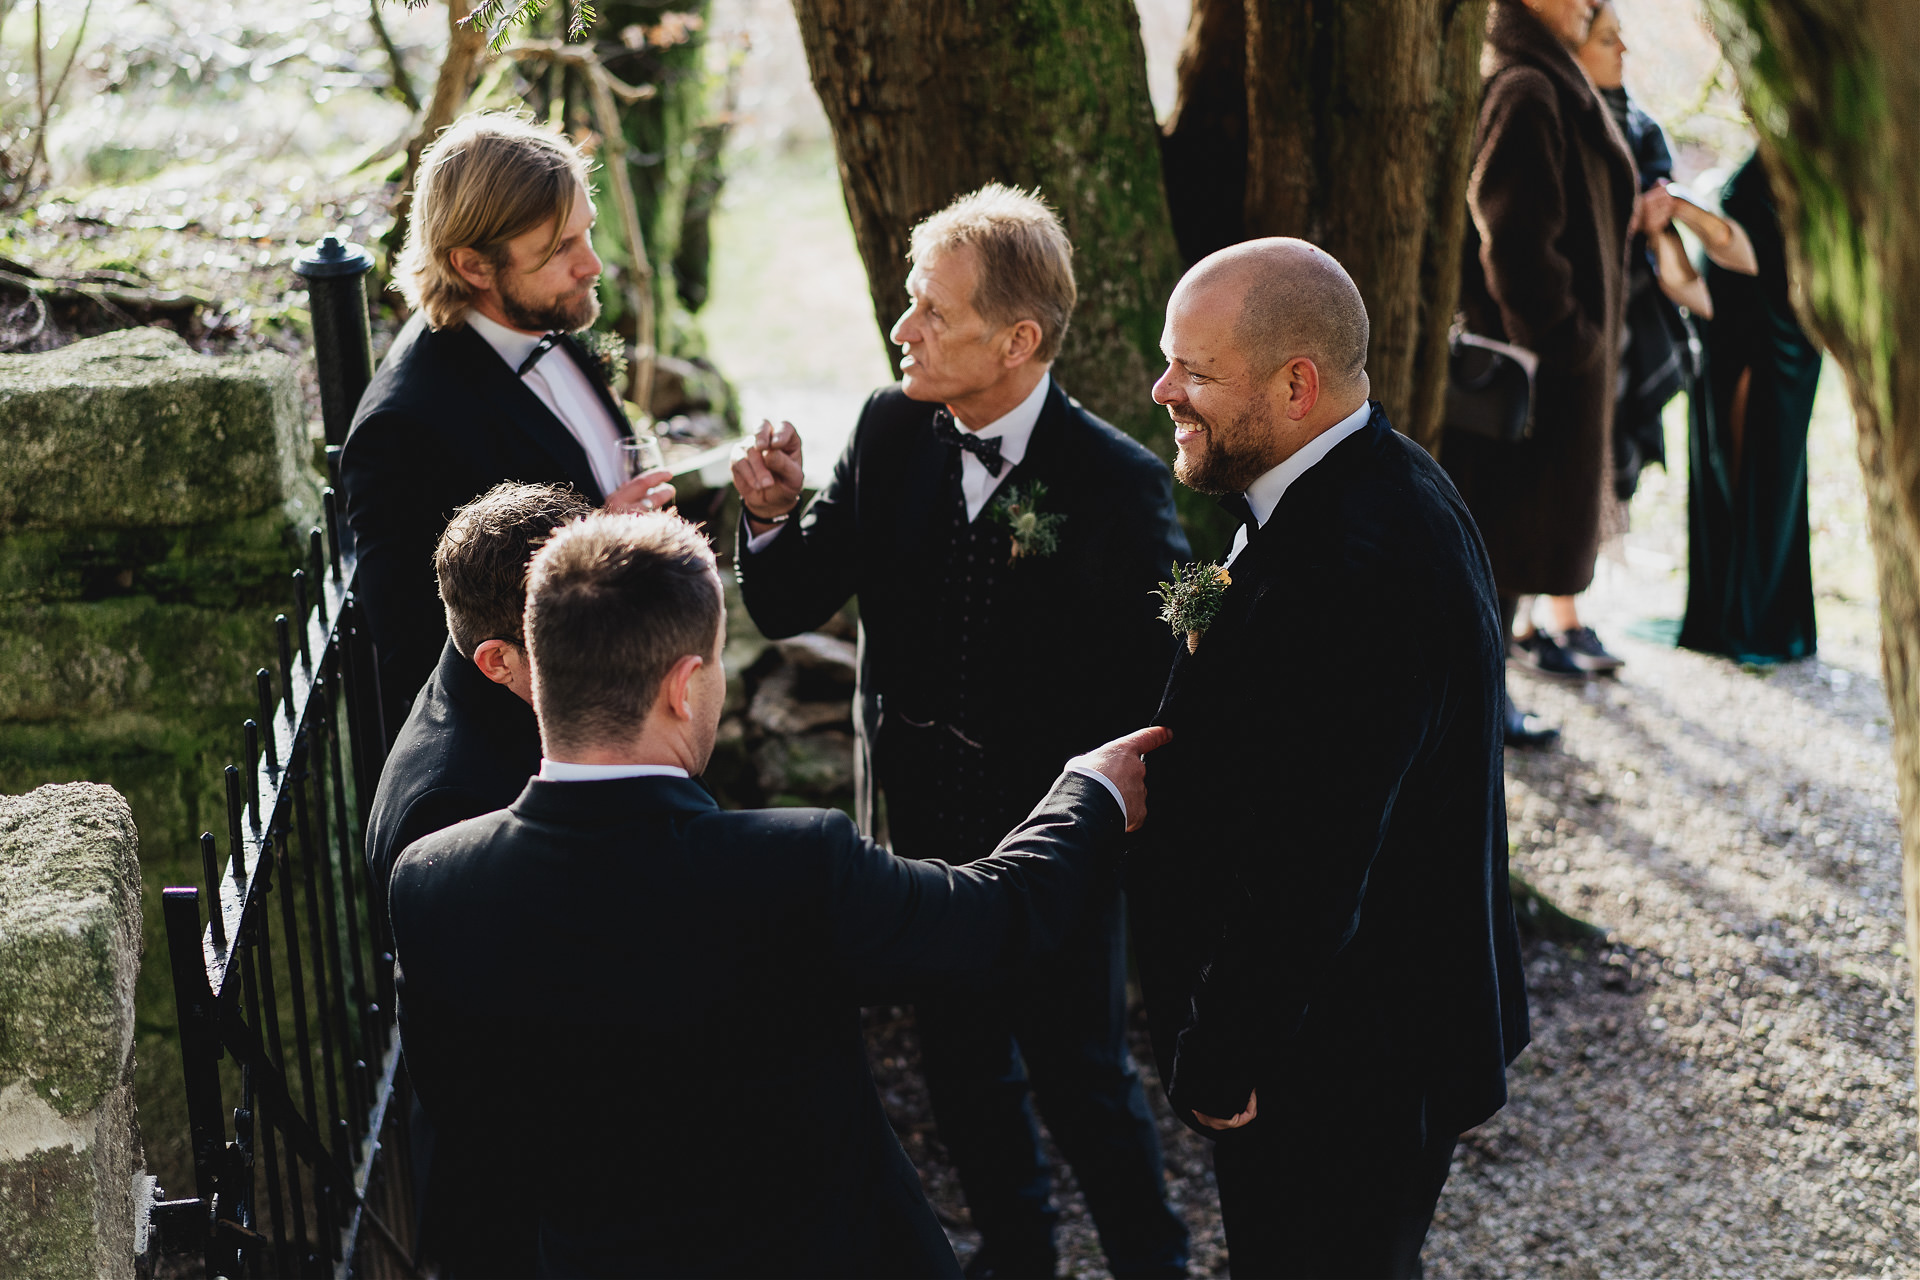 Groom and other wedding guests chatting